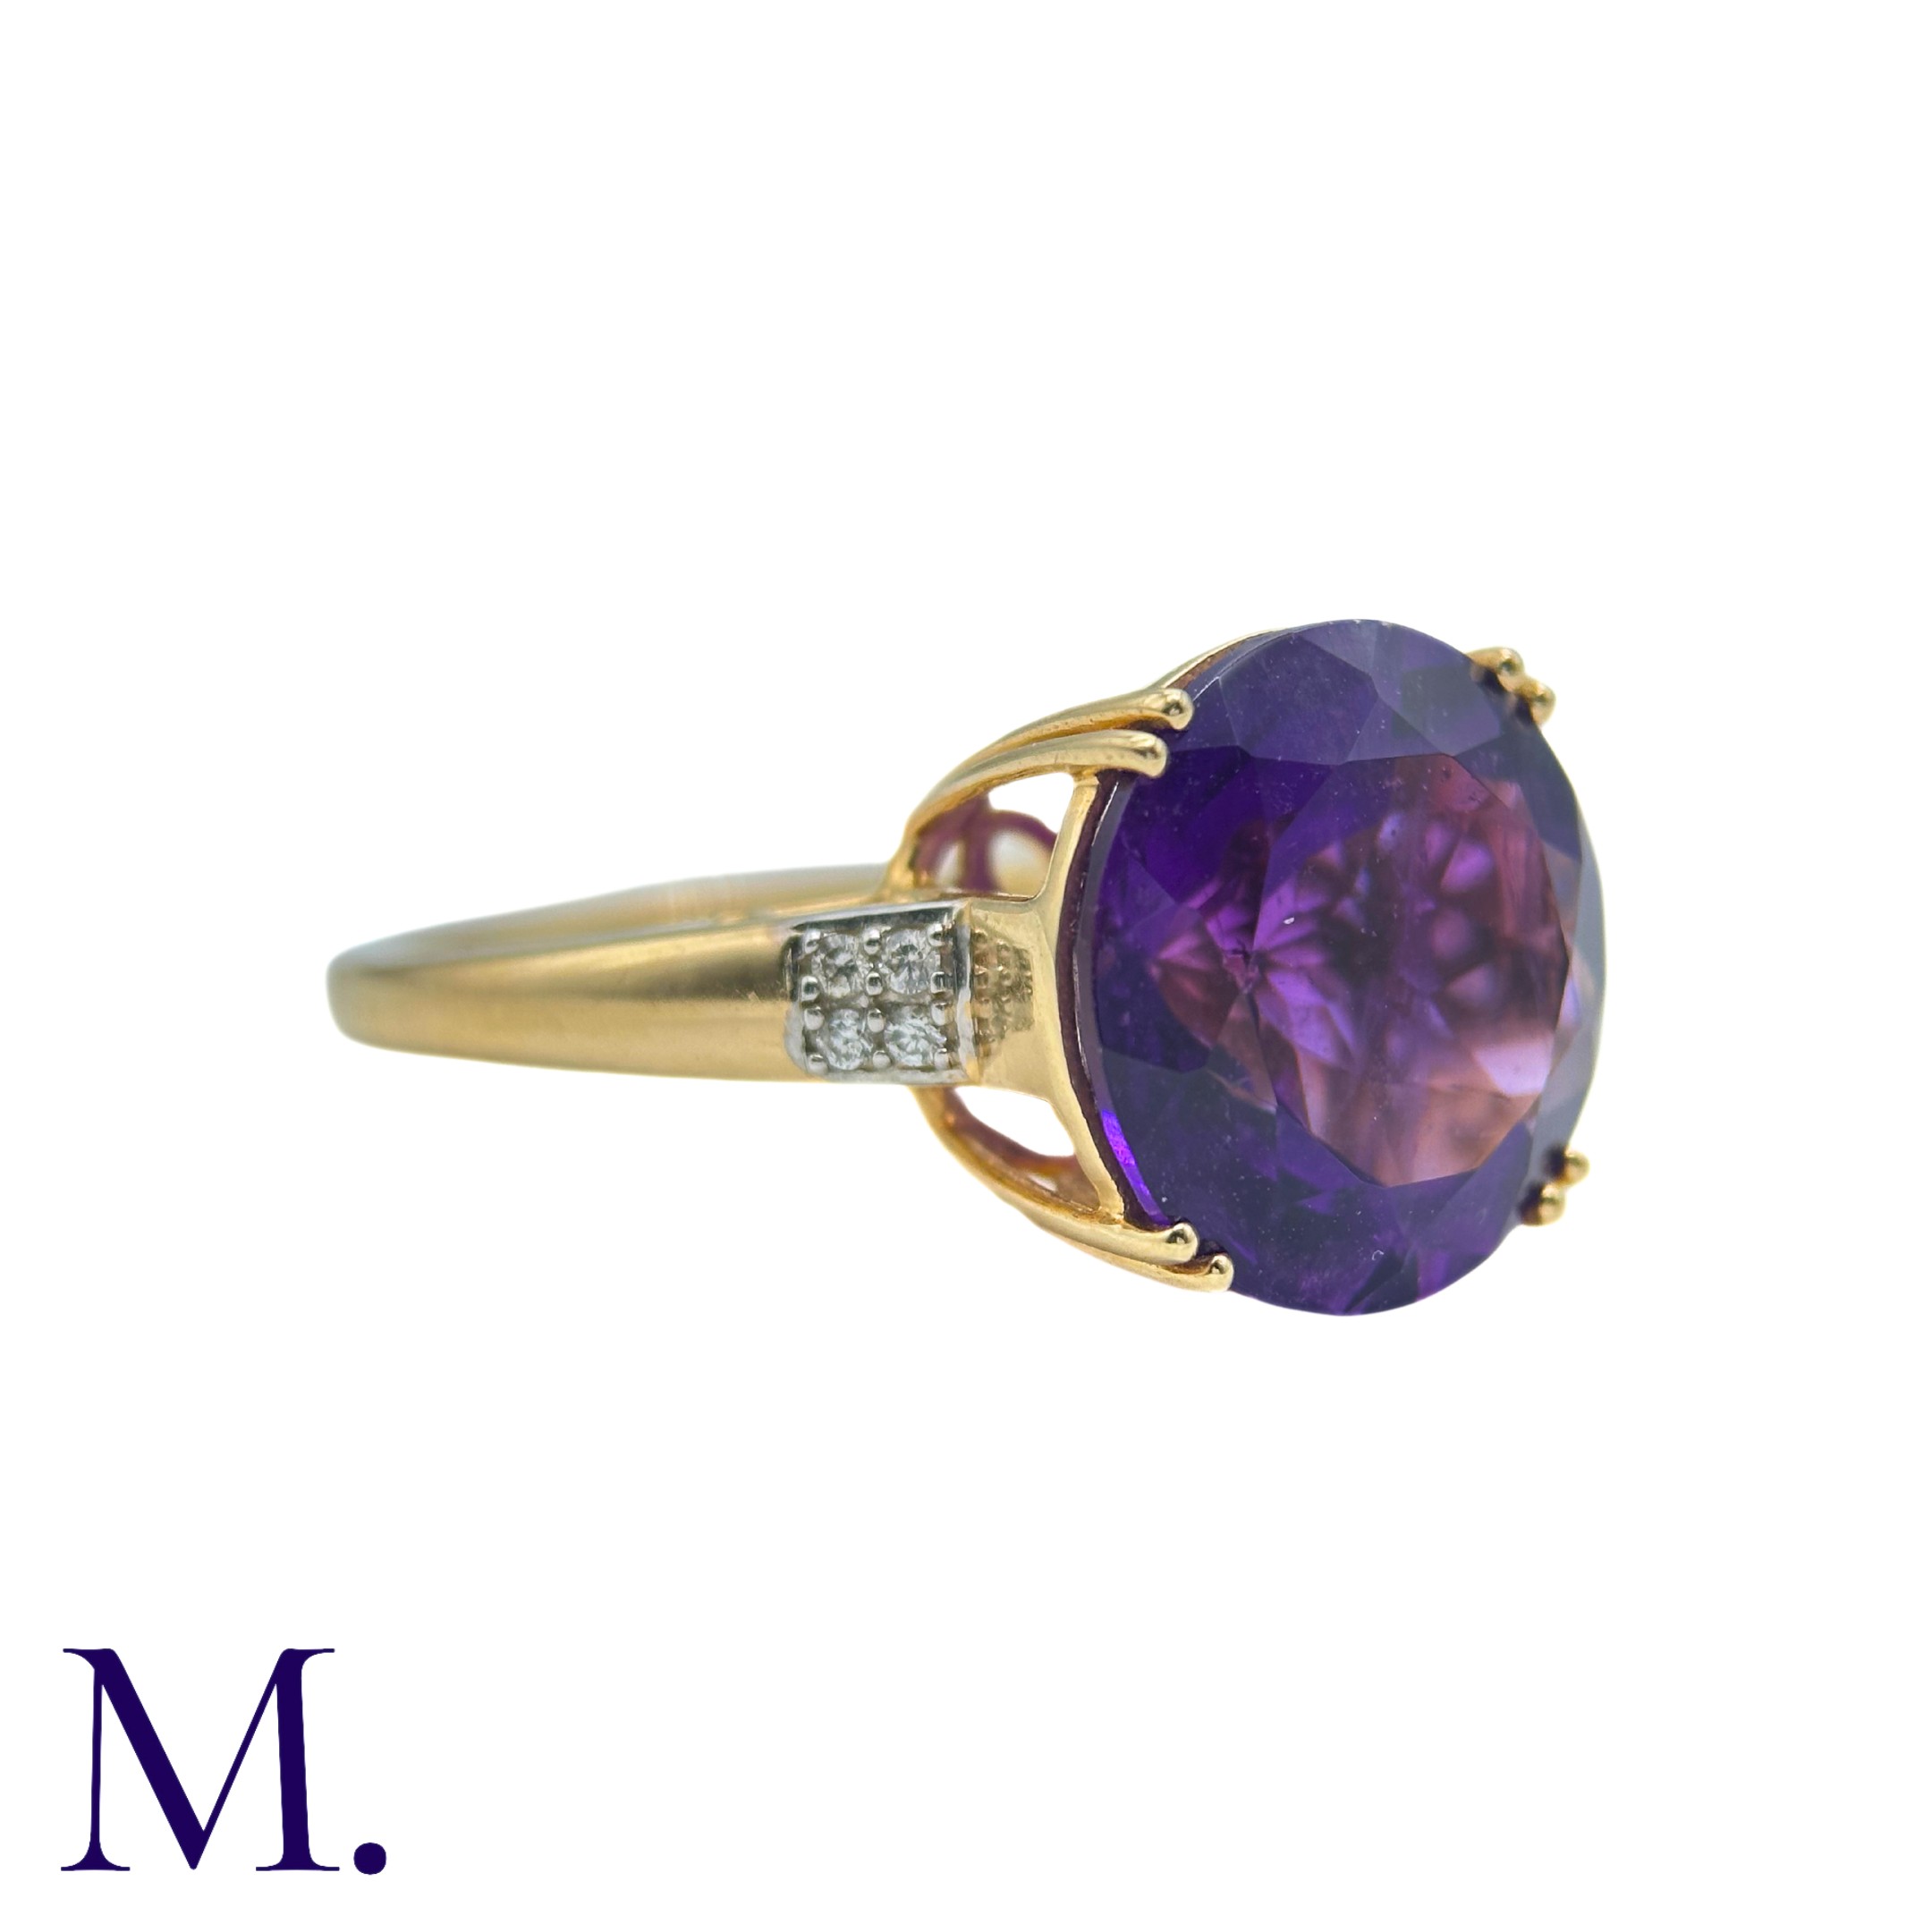 An Amethyst And Diamond Ring in 14k yellow gold, set with a principal round cut amethyst of - Image 3 of 5